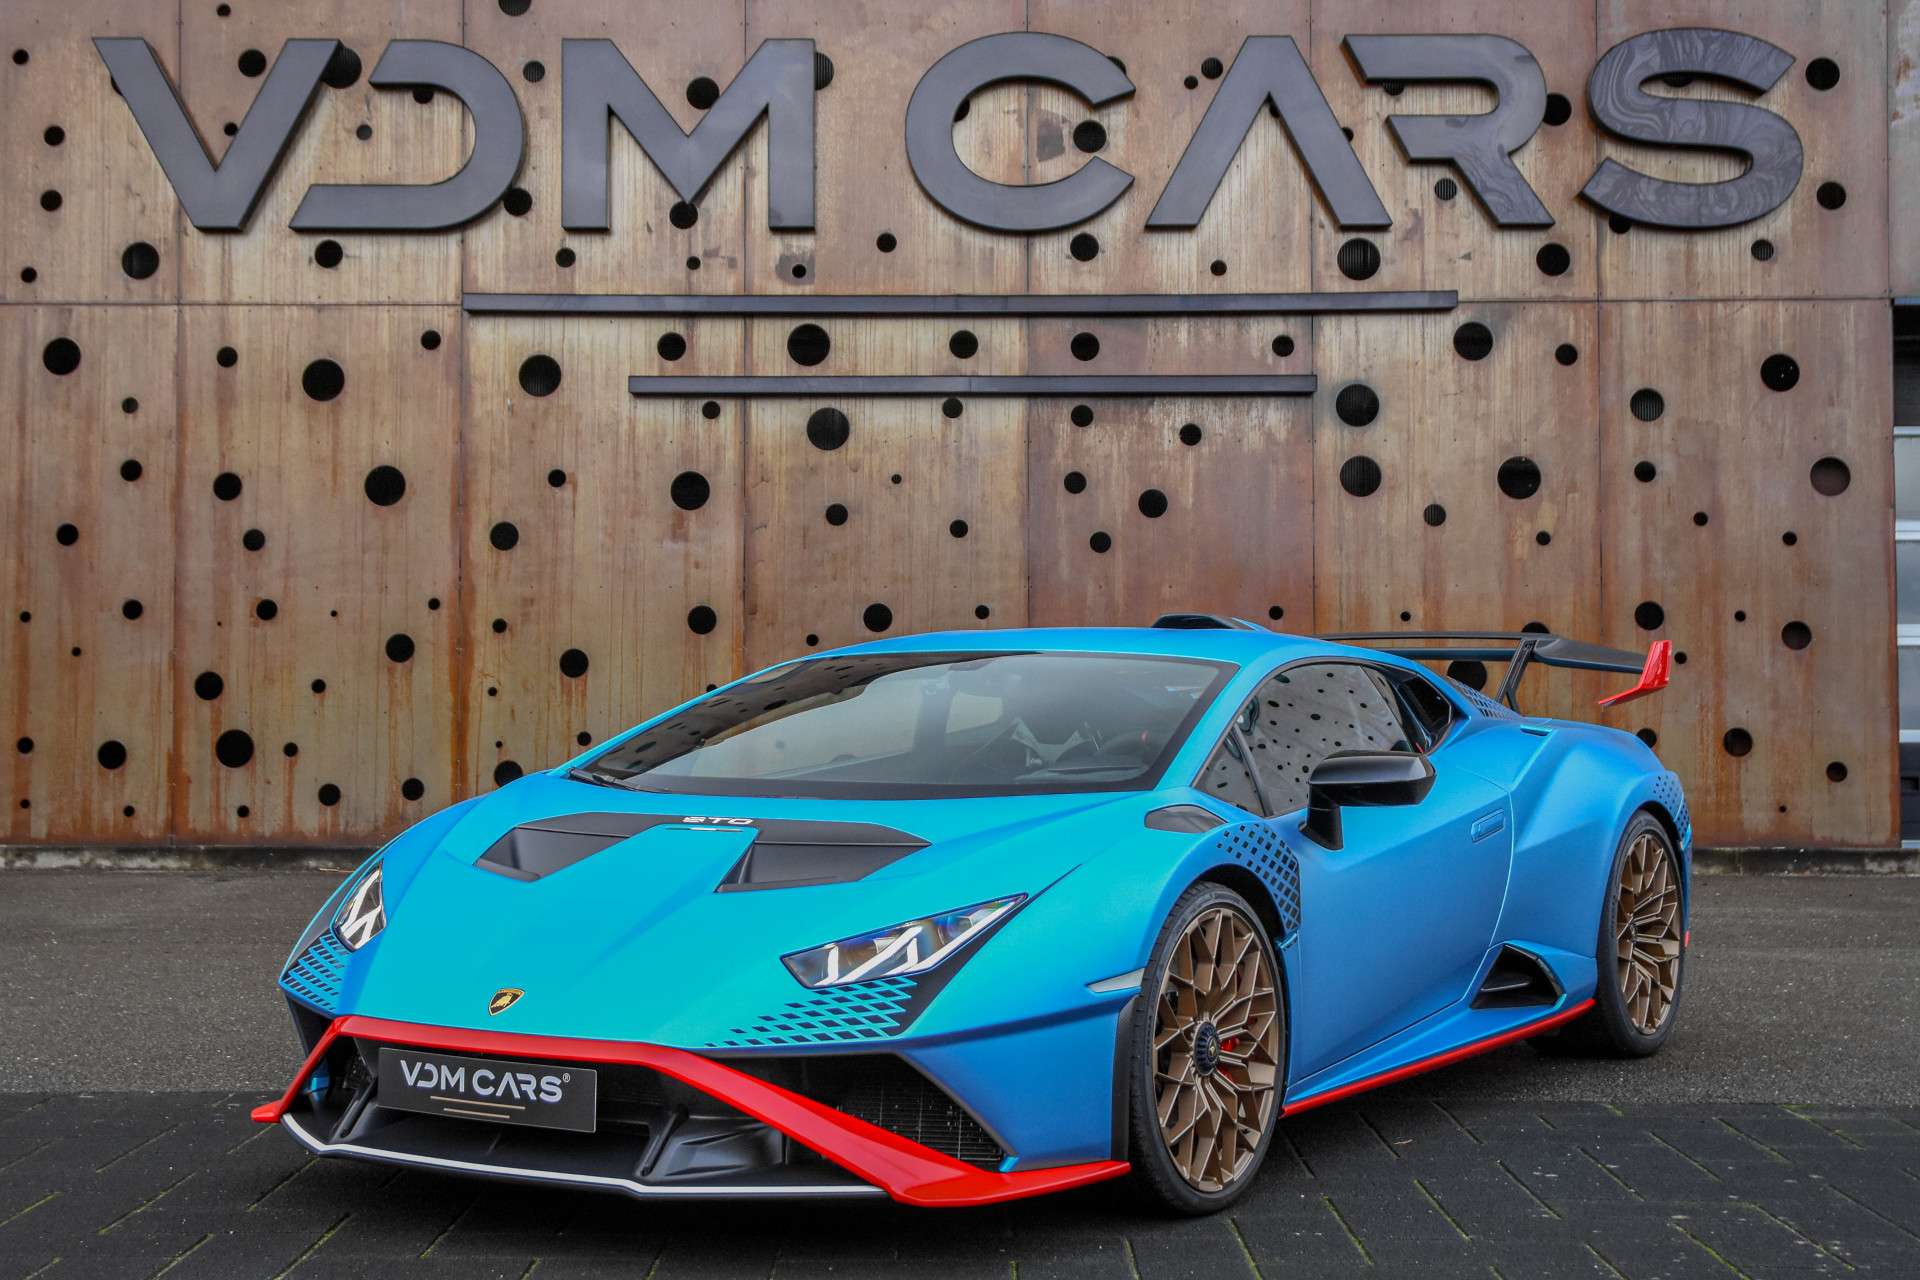 Lamborghini Huracan Coupe in Blue used in HENGELO for € 414,900.-